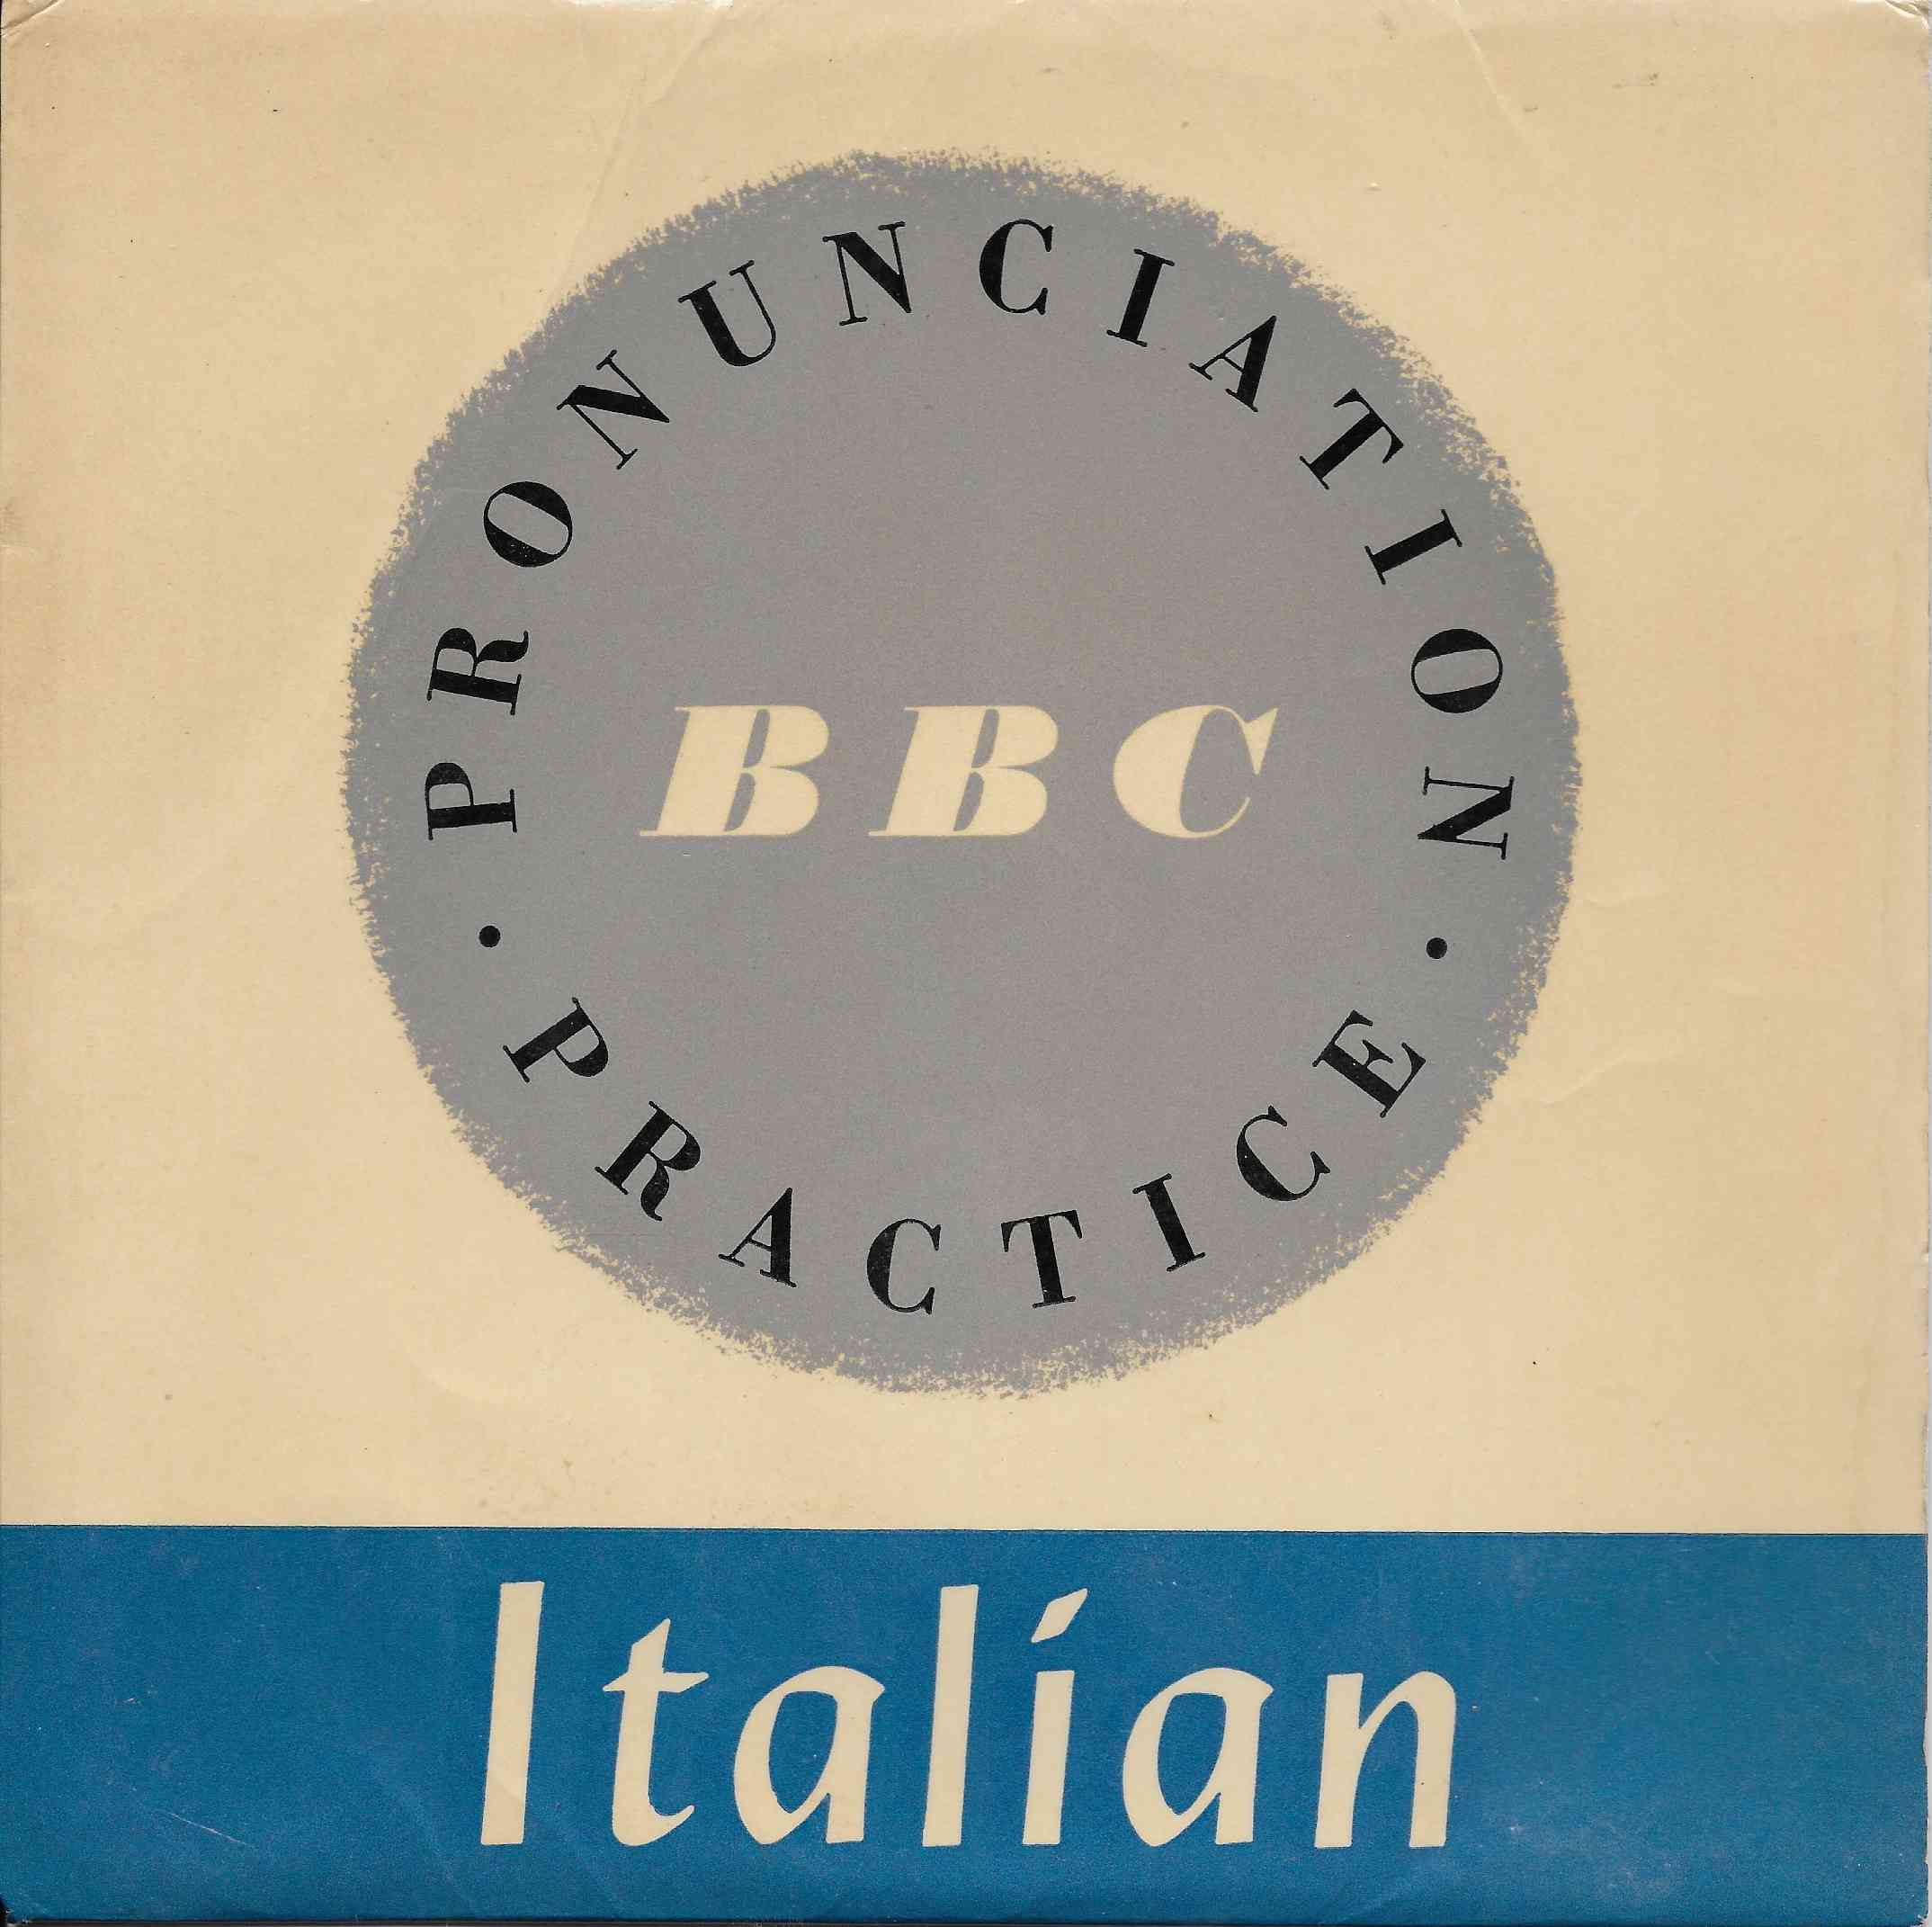 Picture of Italian by artist Elsie Ferguson from the BBC singles - Records and Tapes library